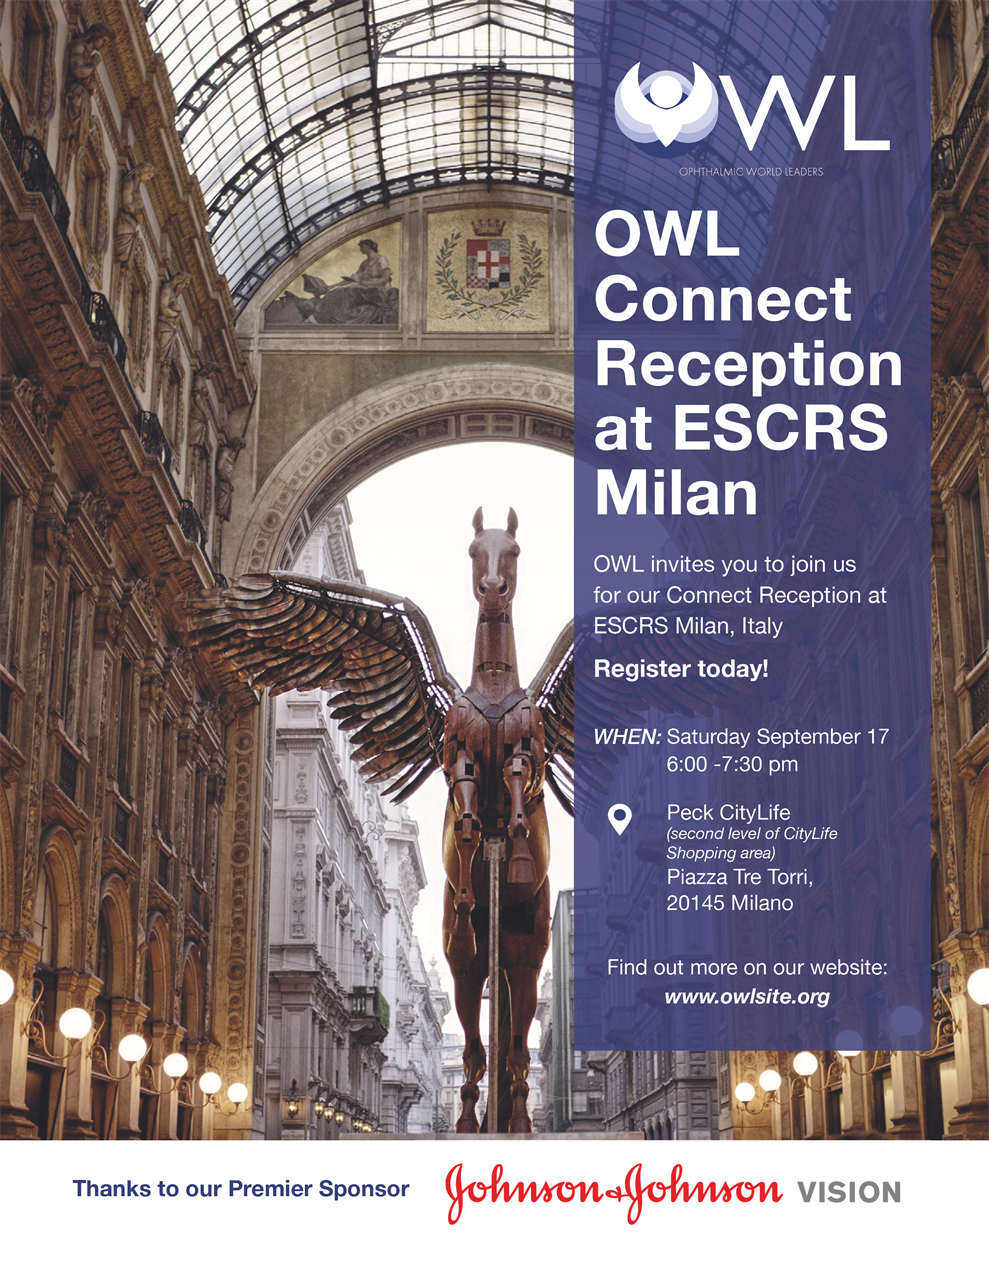 OWL Connect at ESCRS | Peck CityLife - Piazza Tre Torri, 20145 Milano MI, Italy; Sat, September 17th @ 6 PM | Thank you to Johnson & Johnson Vision, our Premier Sponsor (Click to register)